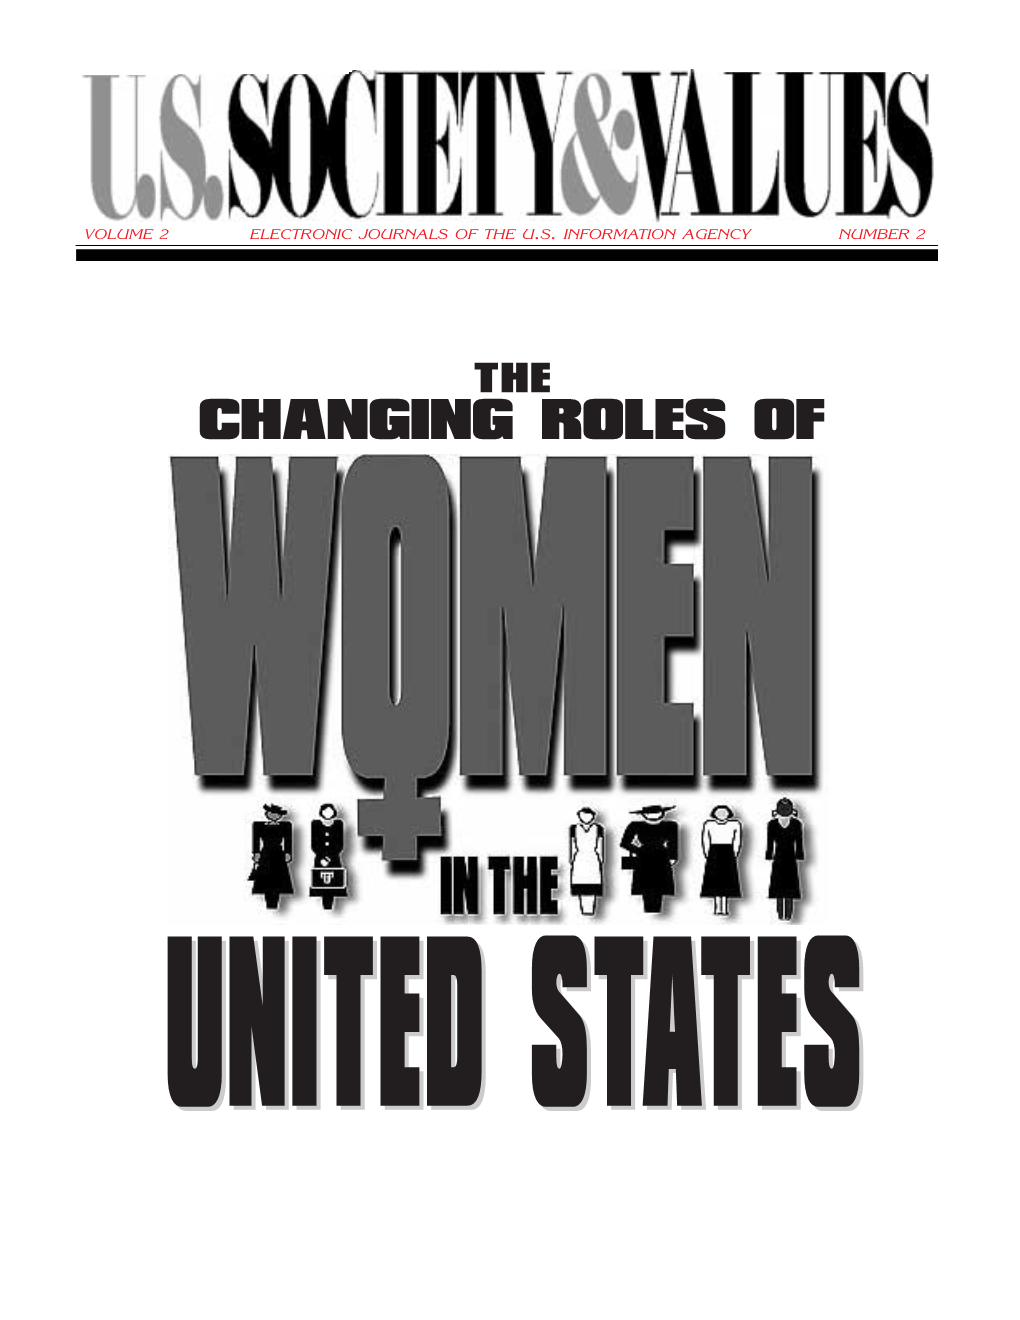 The Changing Role of Women in the United States